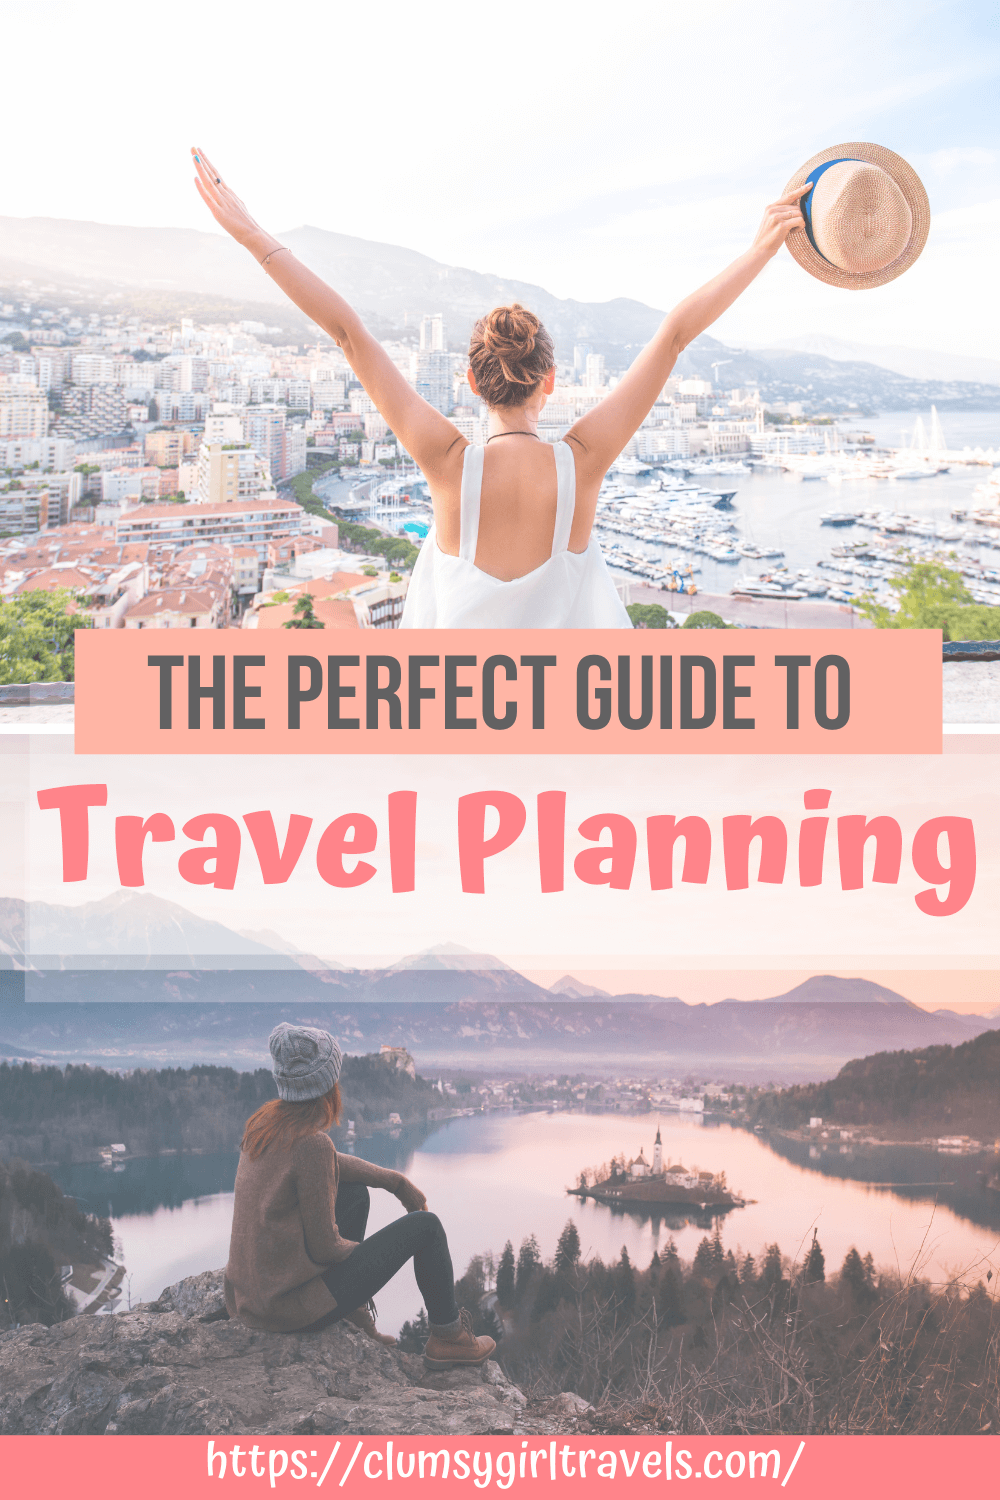 Travel planning can be overwhelming, but with this step by step trip planning guide, you will plan the perfect vacation in no time! #travelplanning #travelplanner #tripplanner